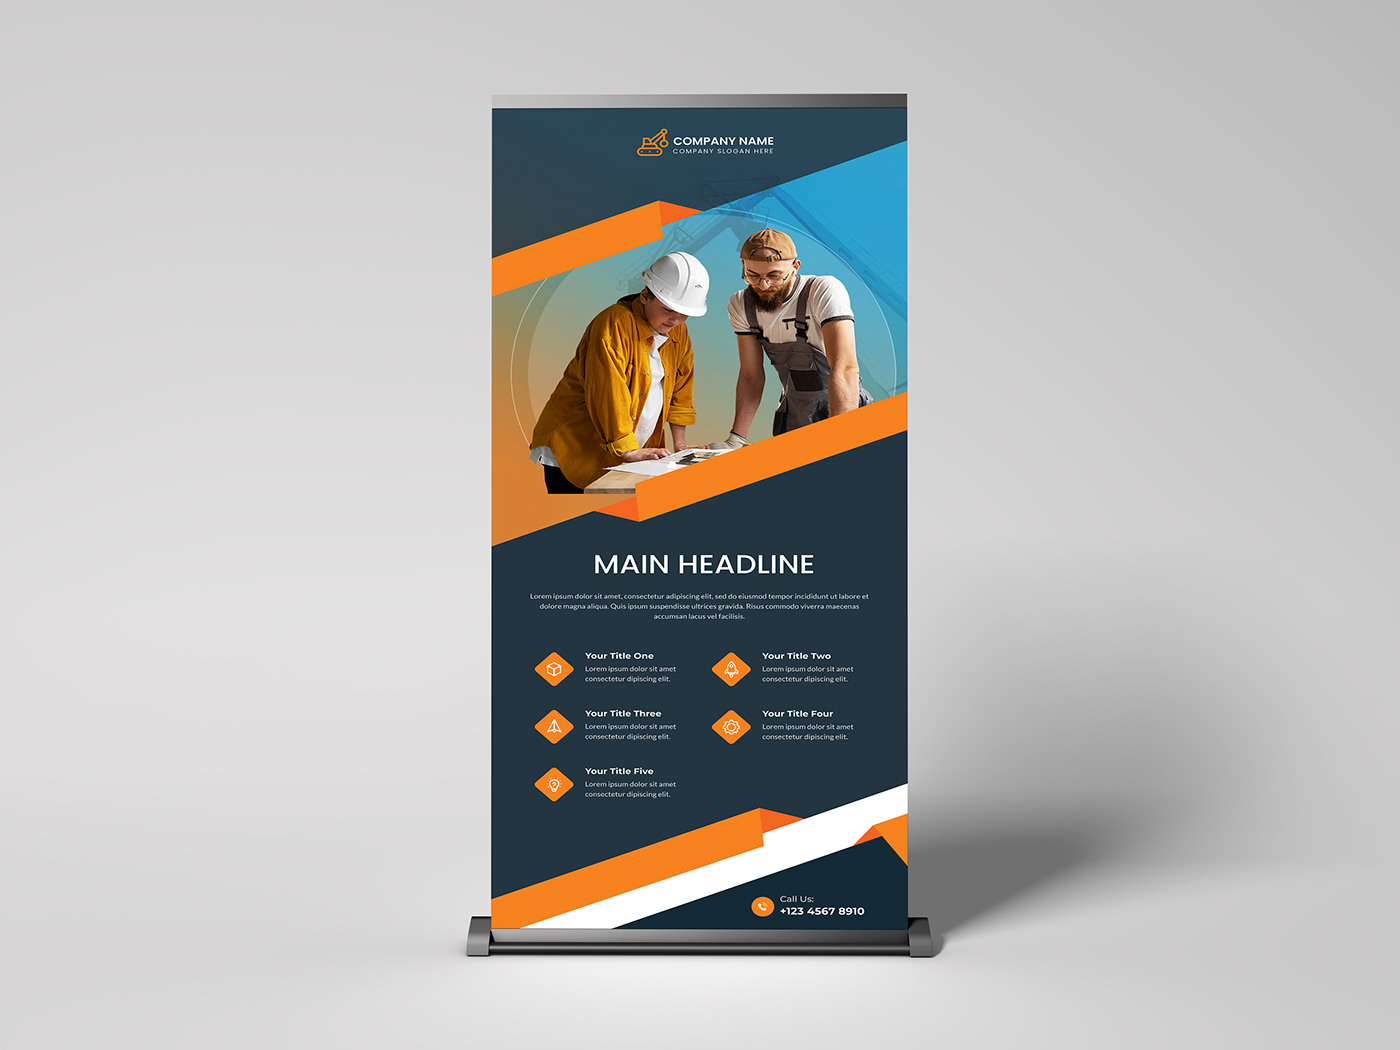 roll up banner size
Roll up banner design template free
Roll up banner design template
Roll up banne